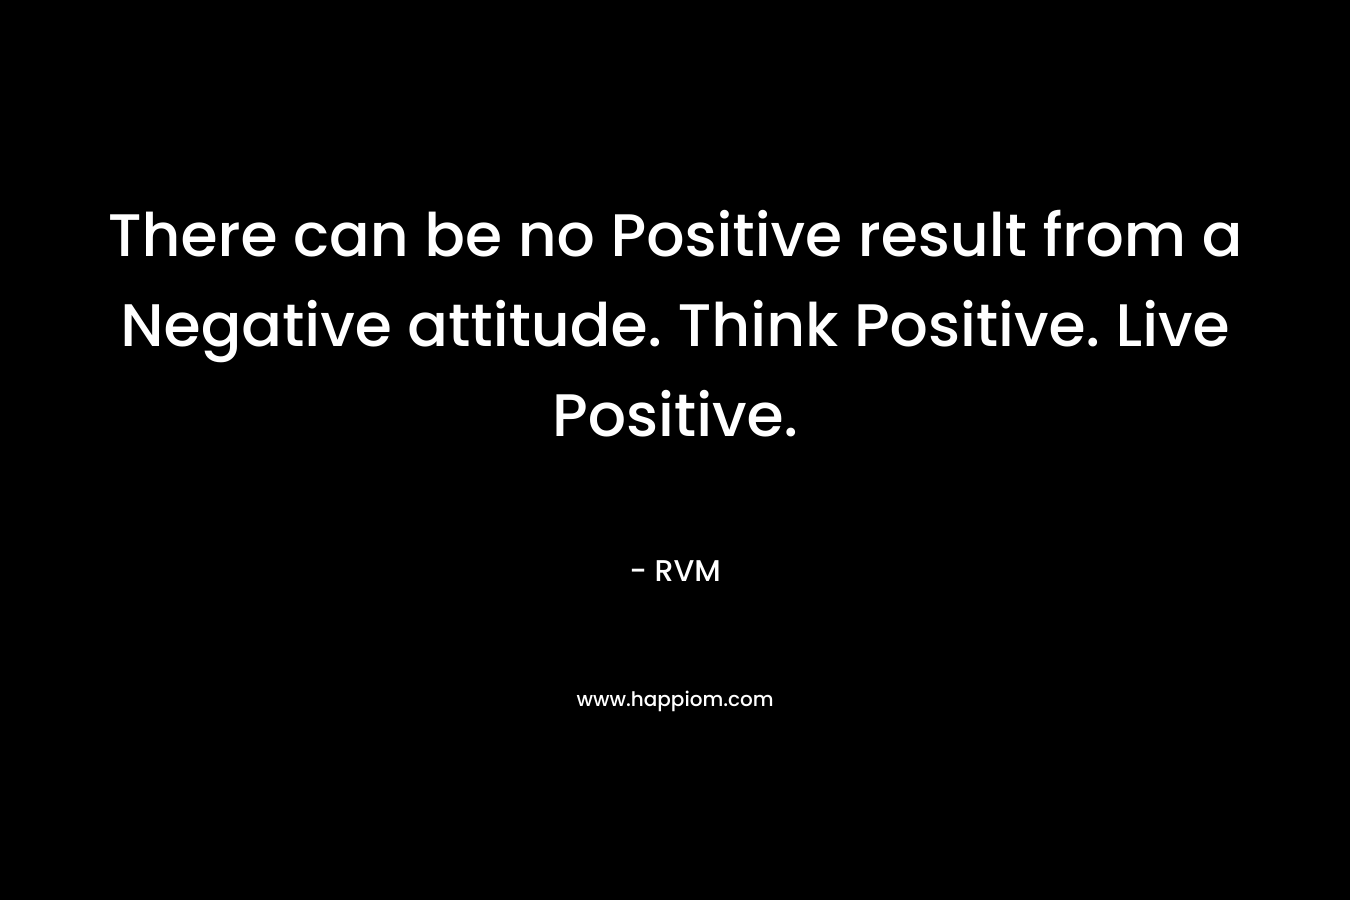 There can be no Positive result from a Negative attitude. Think Positive. Live Positive.